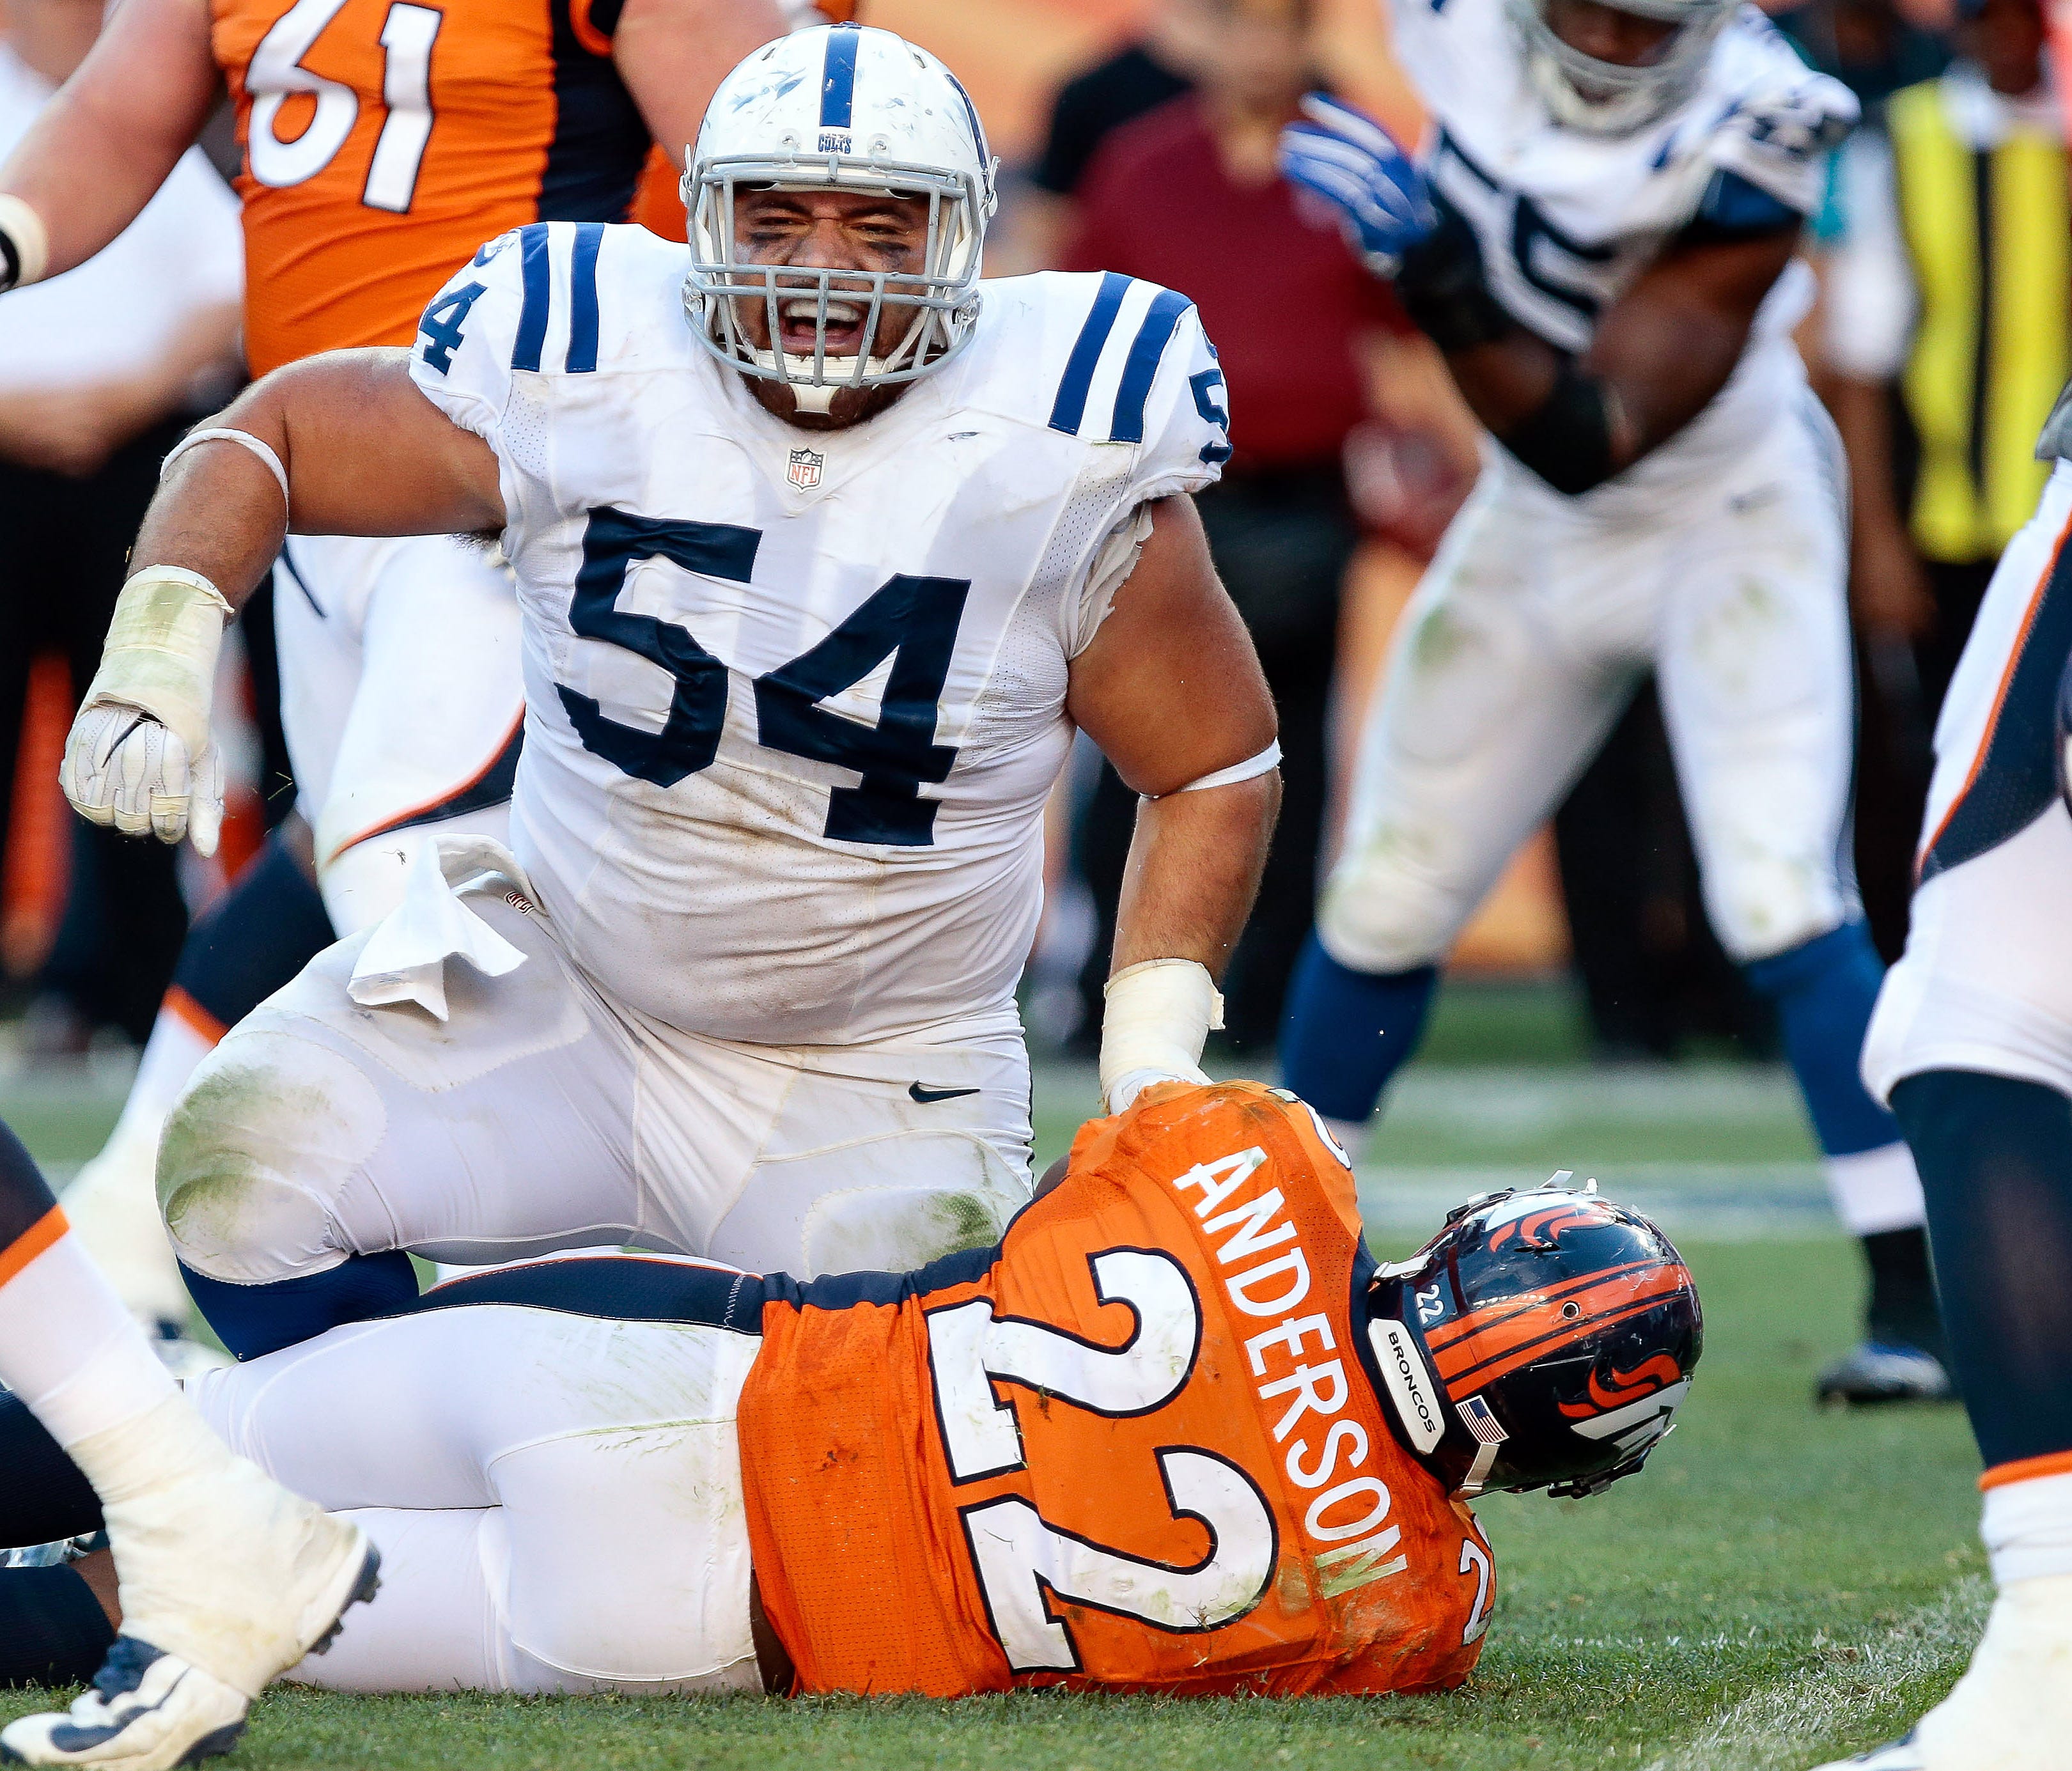 Colts nose tackle David Parry tackles Denver Broncos running back C.J. Anderson during the fourth quarter of their 2016 regular-season game at Sports Authority Field at Mile High in Denver.